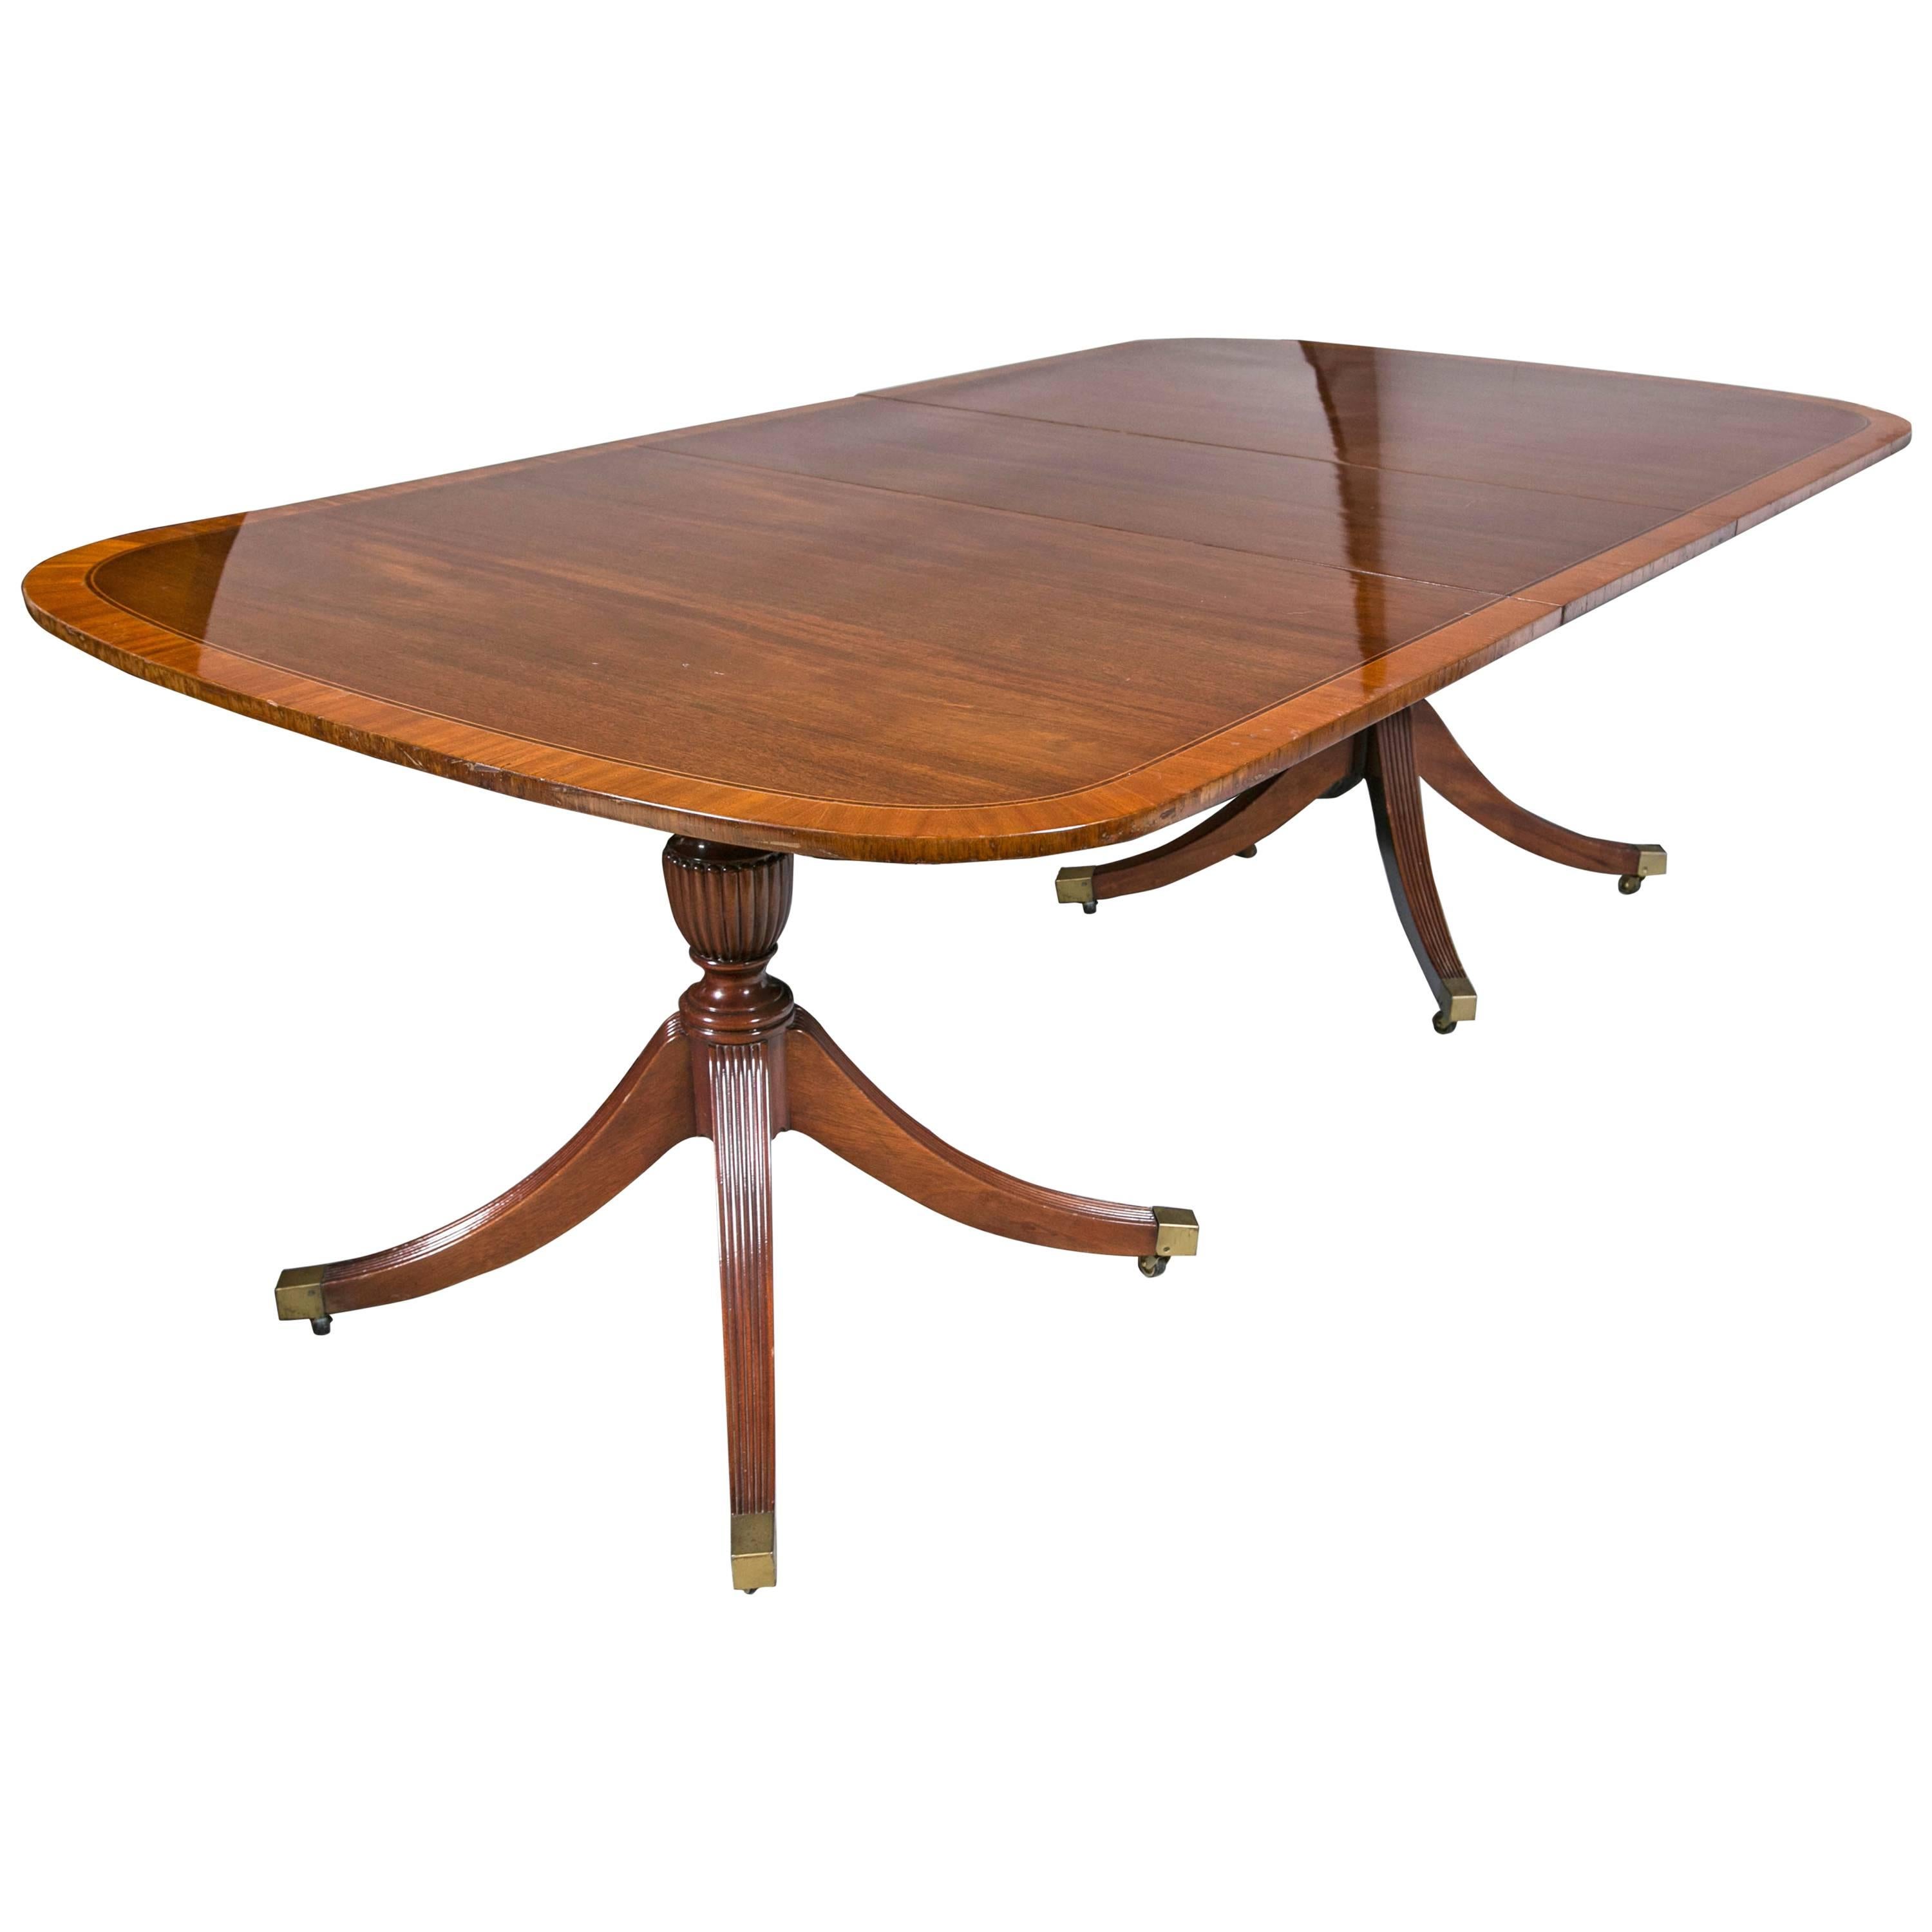 Georgian Style Mahogany Banded Dining Table by Baker with Two Leaves